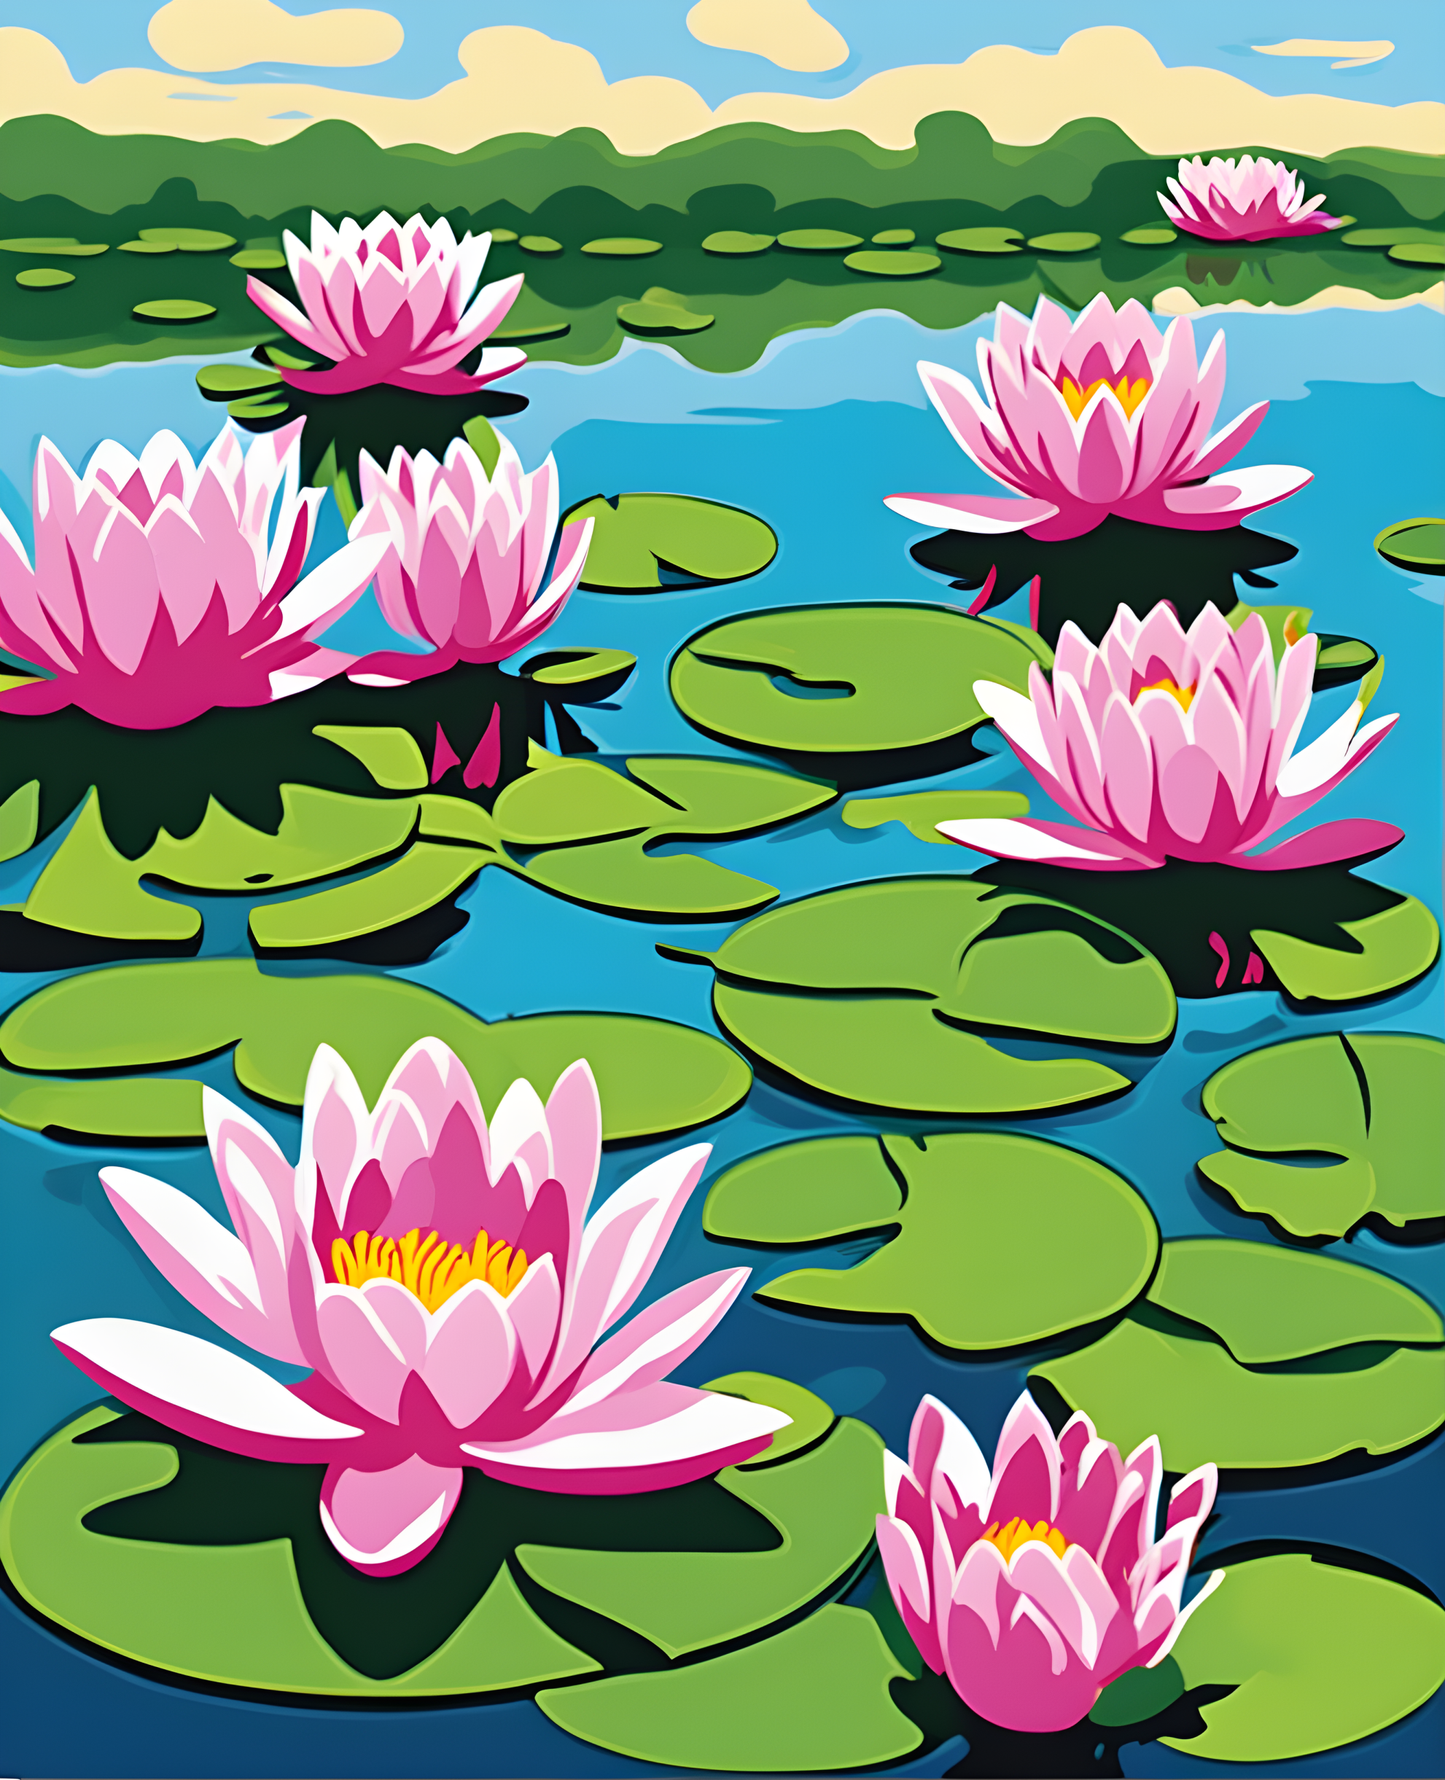 Flowers Collection OD (15) - Water Lily - Van-Go Paint-By-Number Kit